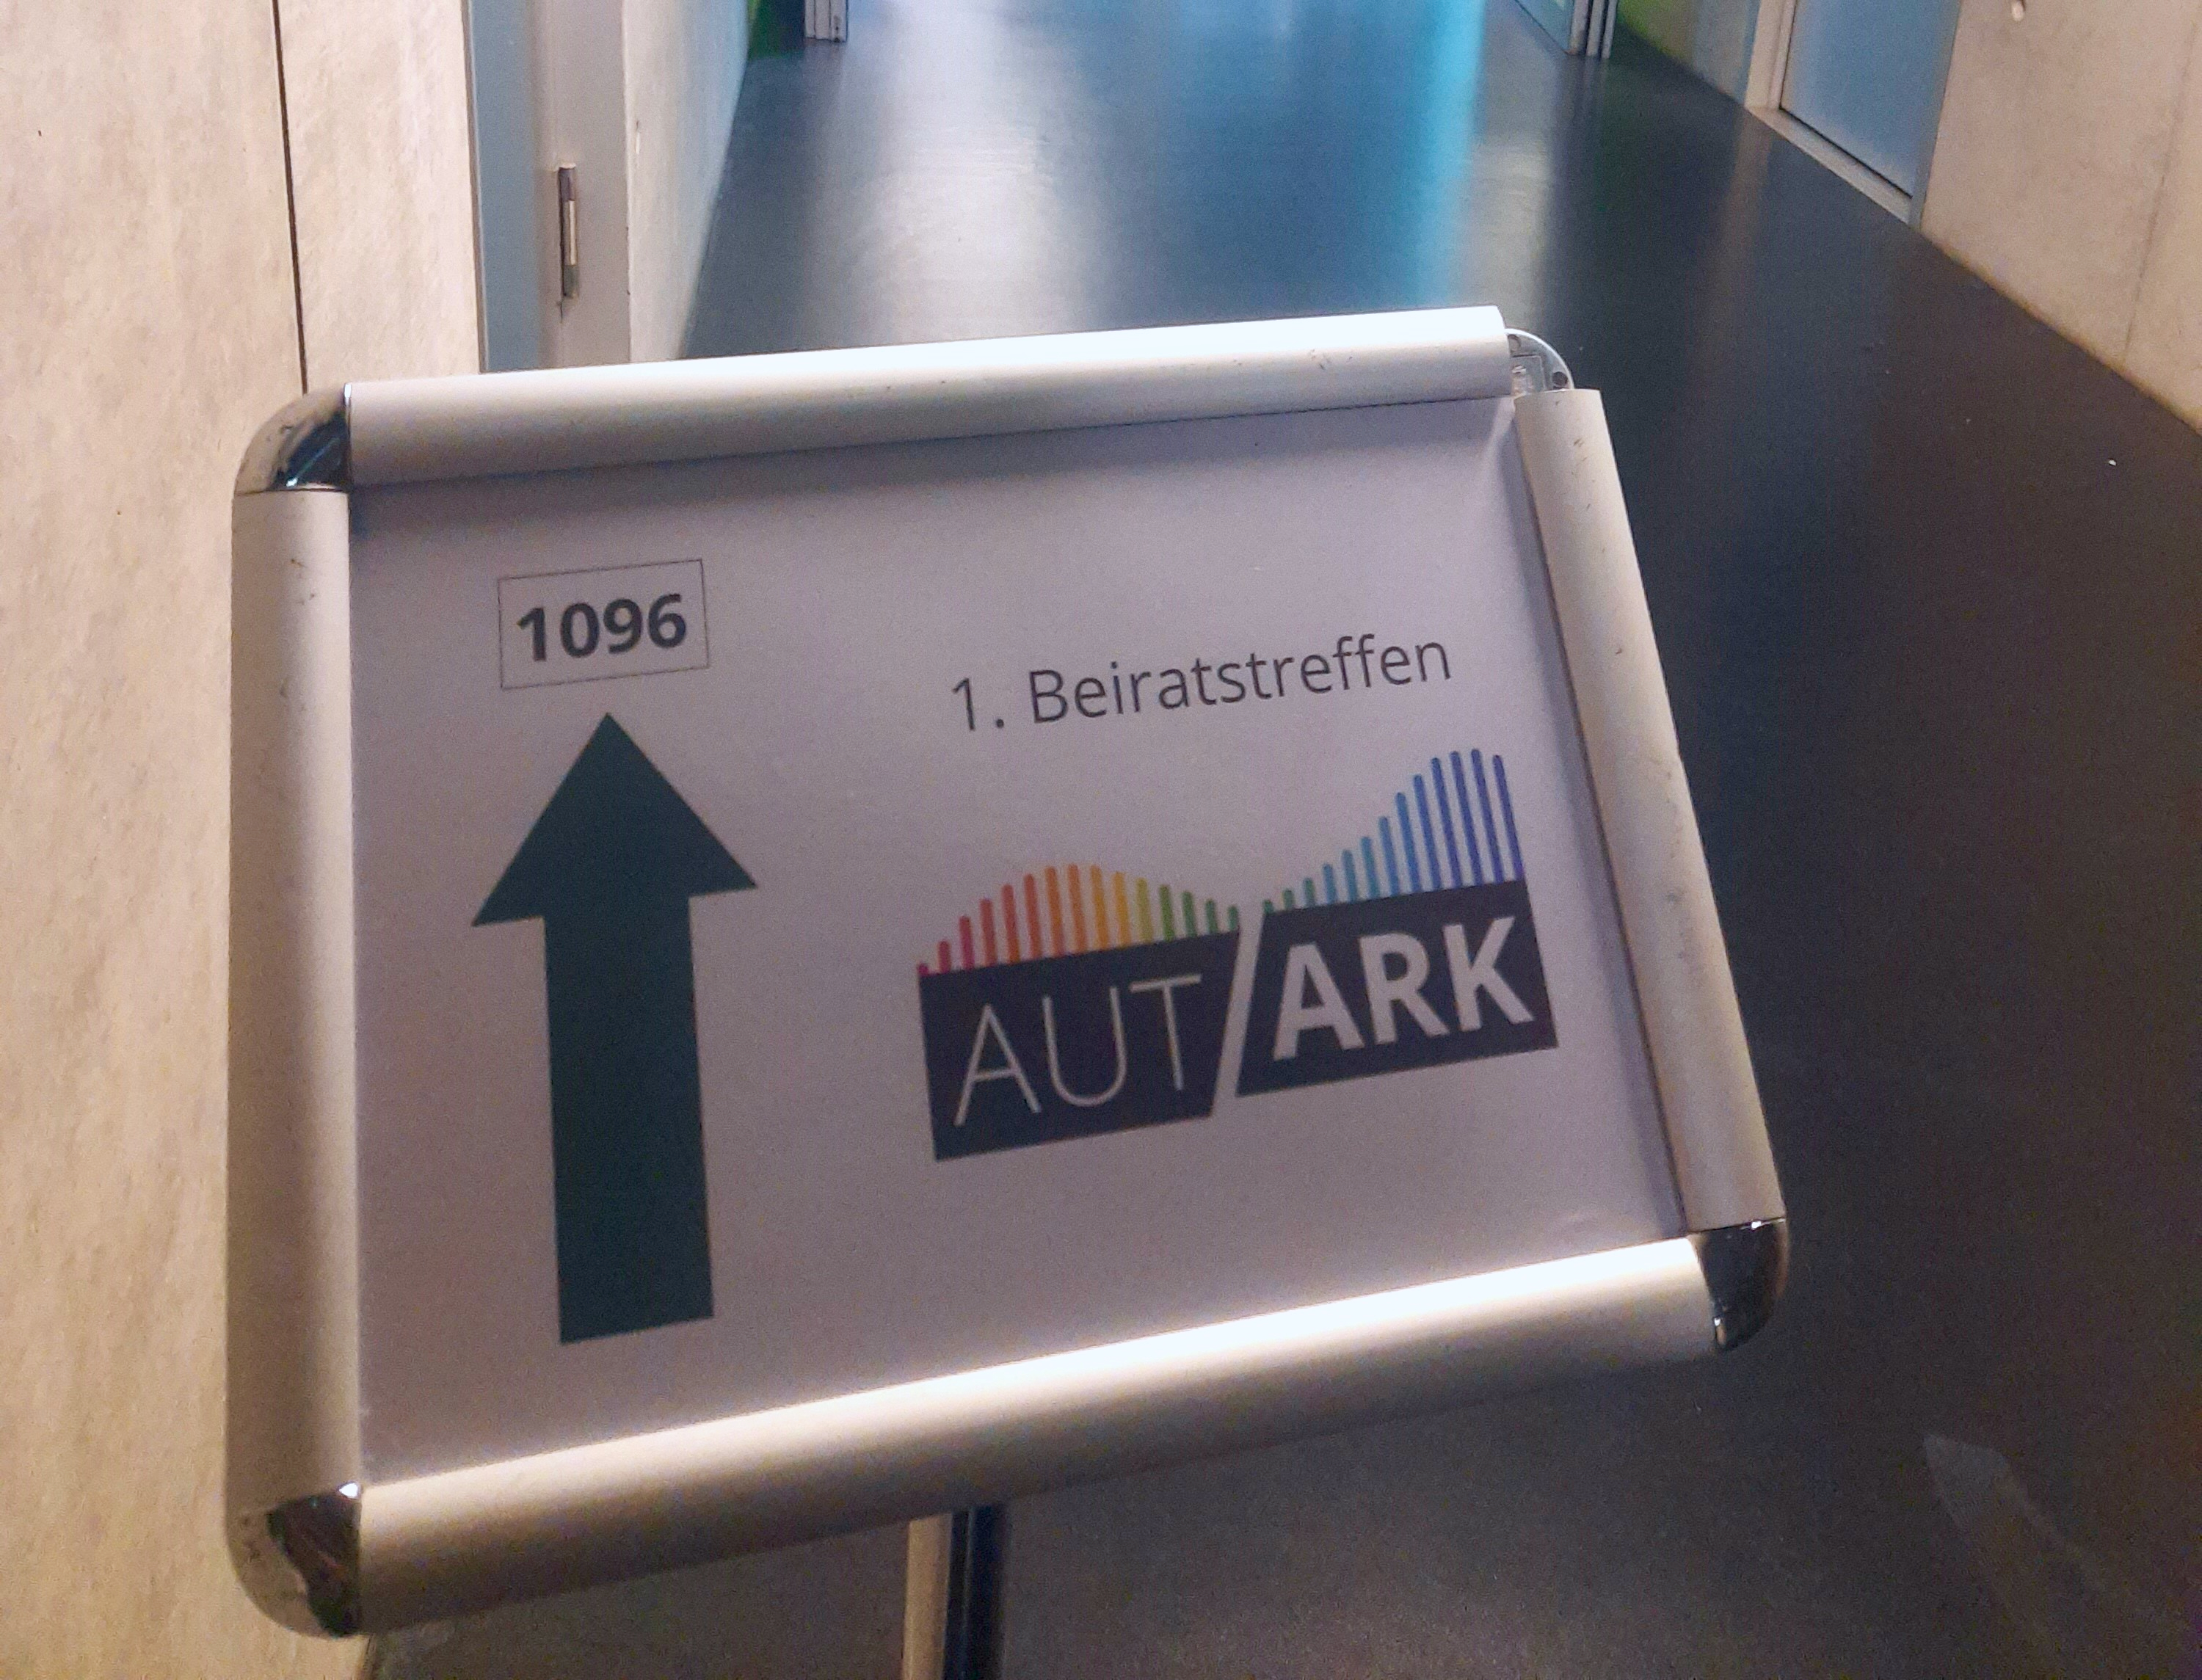 Sign in a corridor with an arrow pointing forwards and the inscription "1096" Next to it on the right is the Autark logo and "1st advisory board meeting"